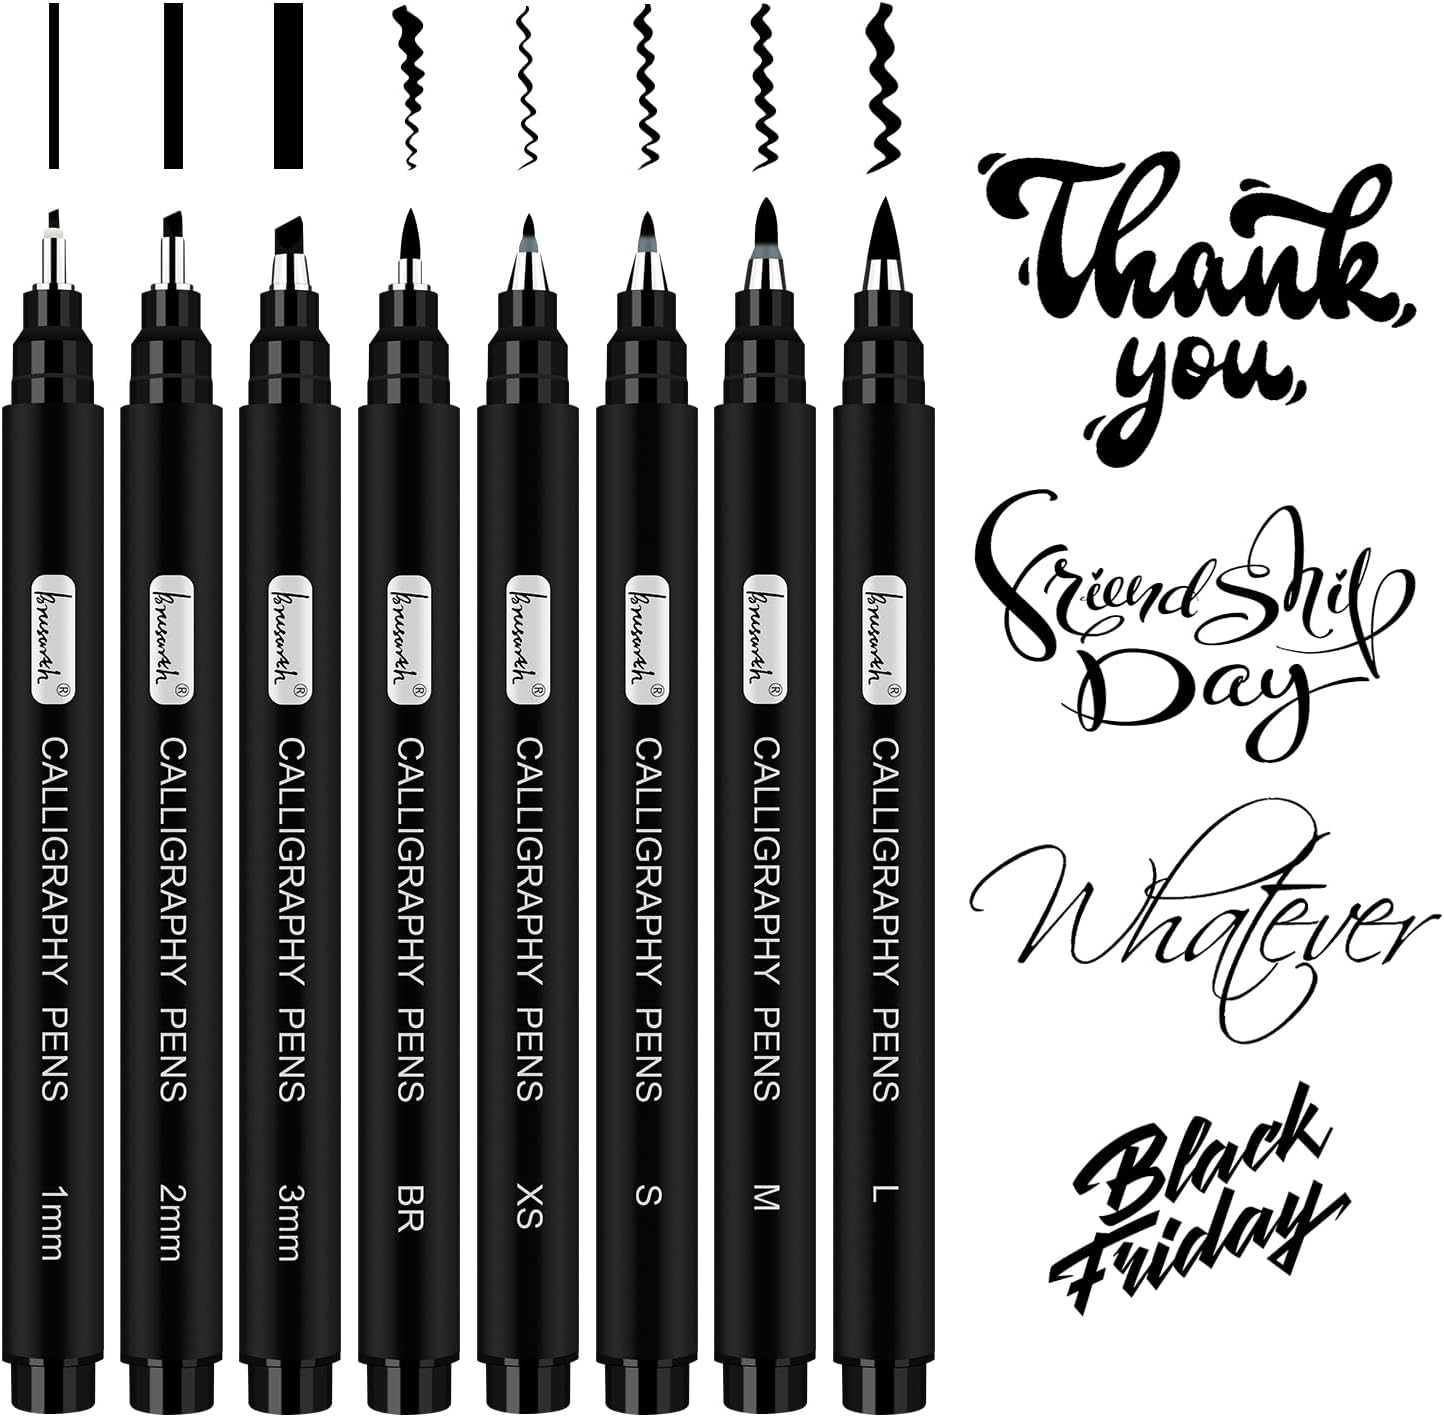 Calligraphy Pens, 8 Size Calligraphy Pens for Writing, Brush Pens Calligraphy Se